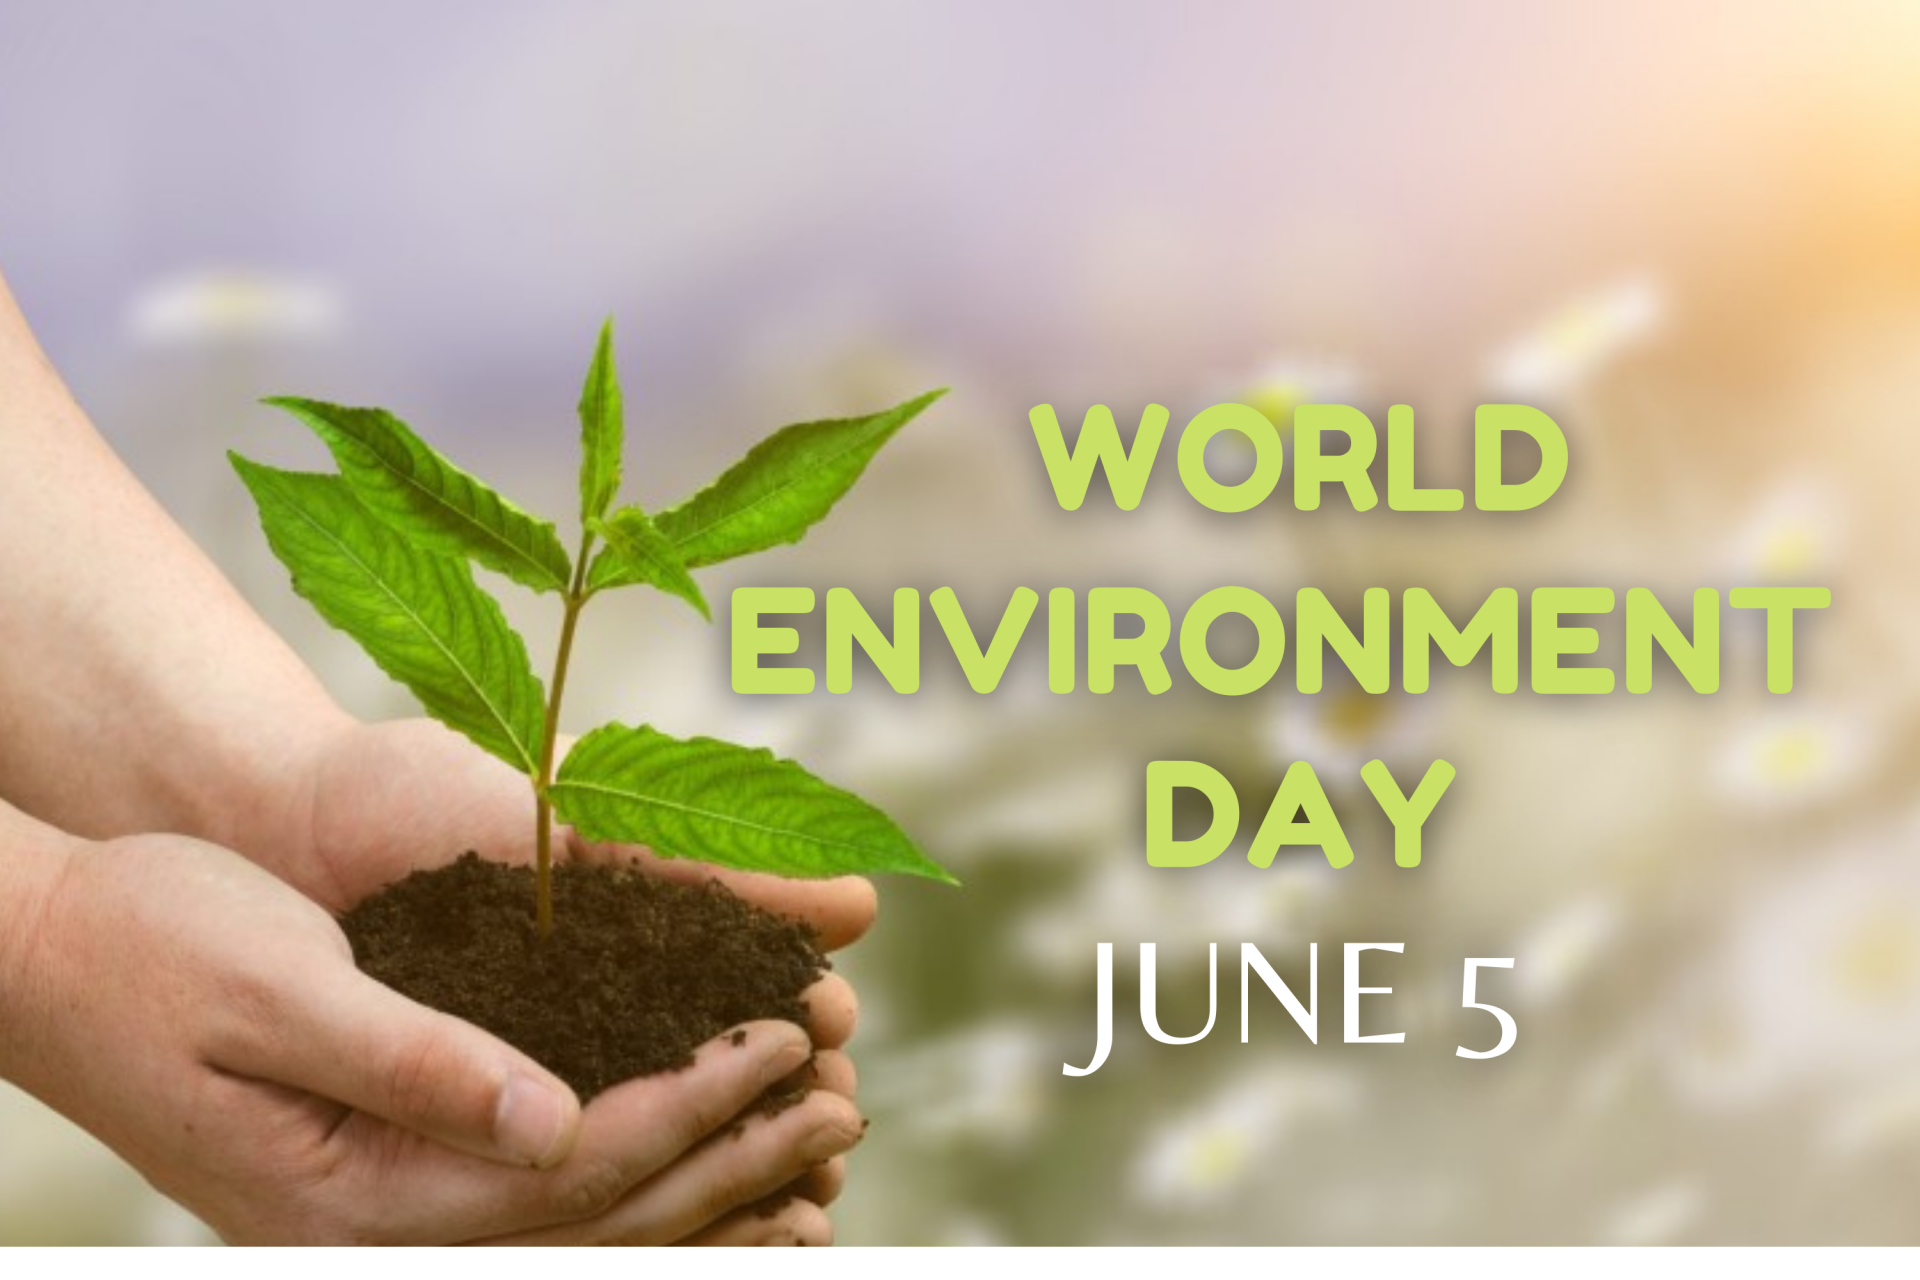 World Environment Day: History, Significance, Theme and Celebrations